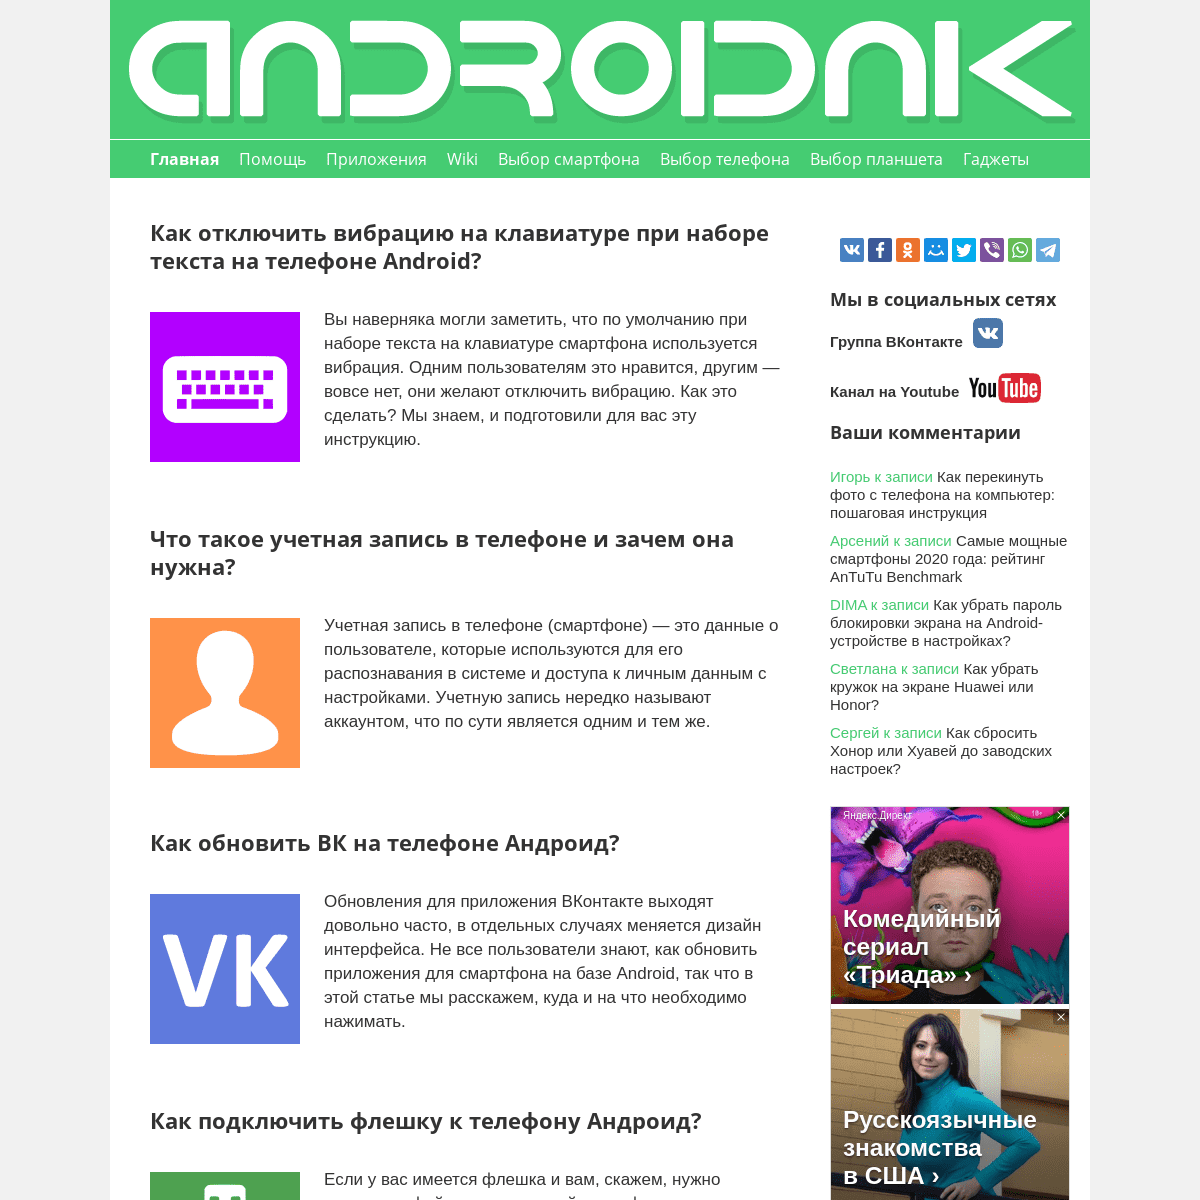 A complete backup of androidnik.ru